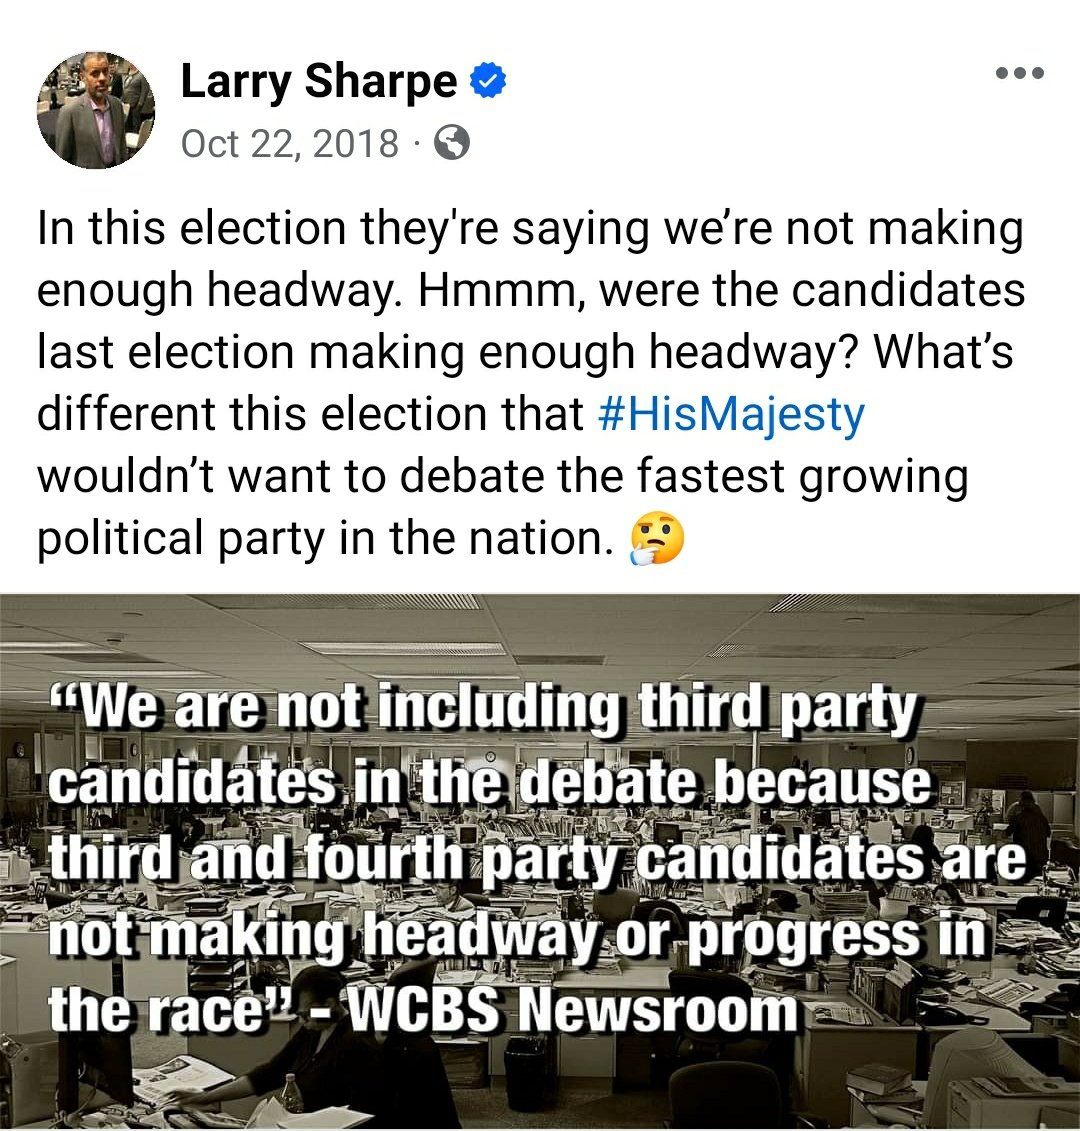 @LarrySharpe knows the third party struggle. The establishment hushes dissent at every turn then points to the rigged system as proof there is no dissent. @LibertarianLars is right. Time to #unrigthesystem